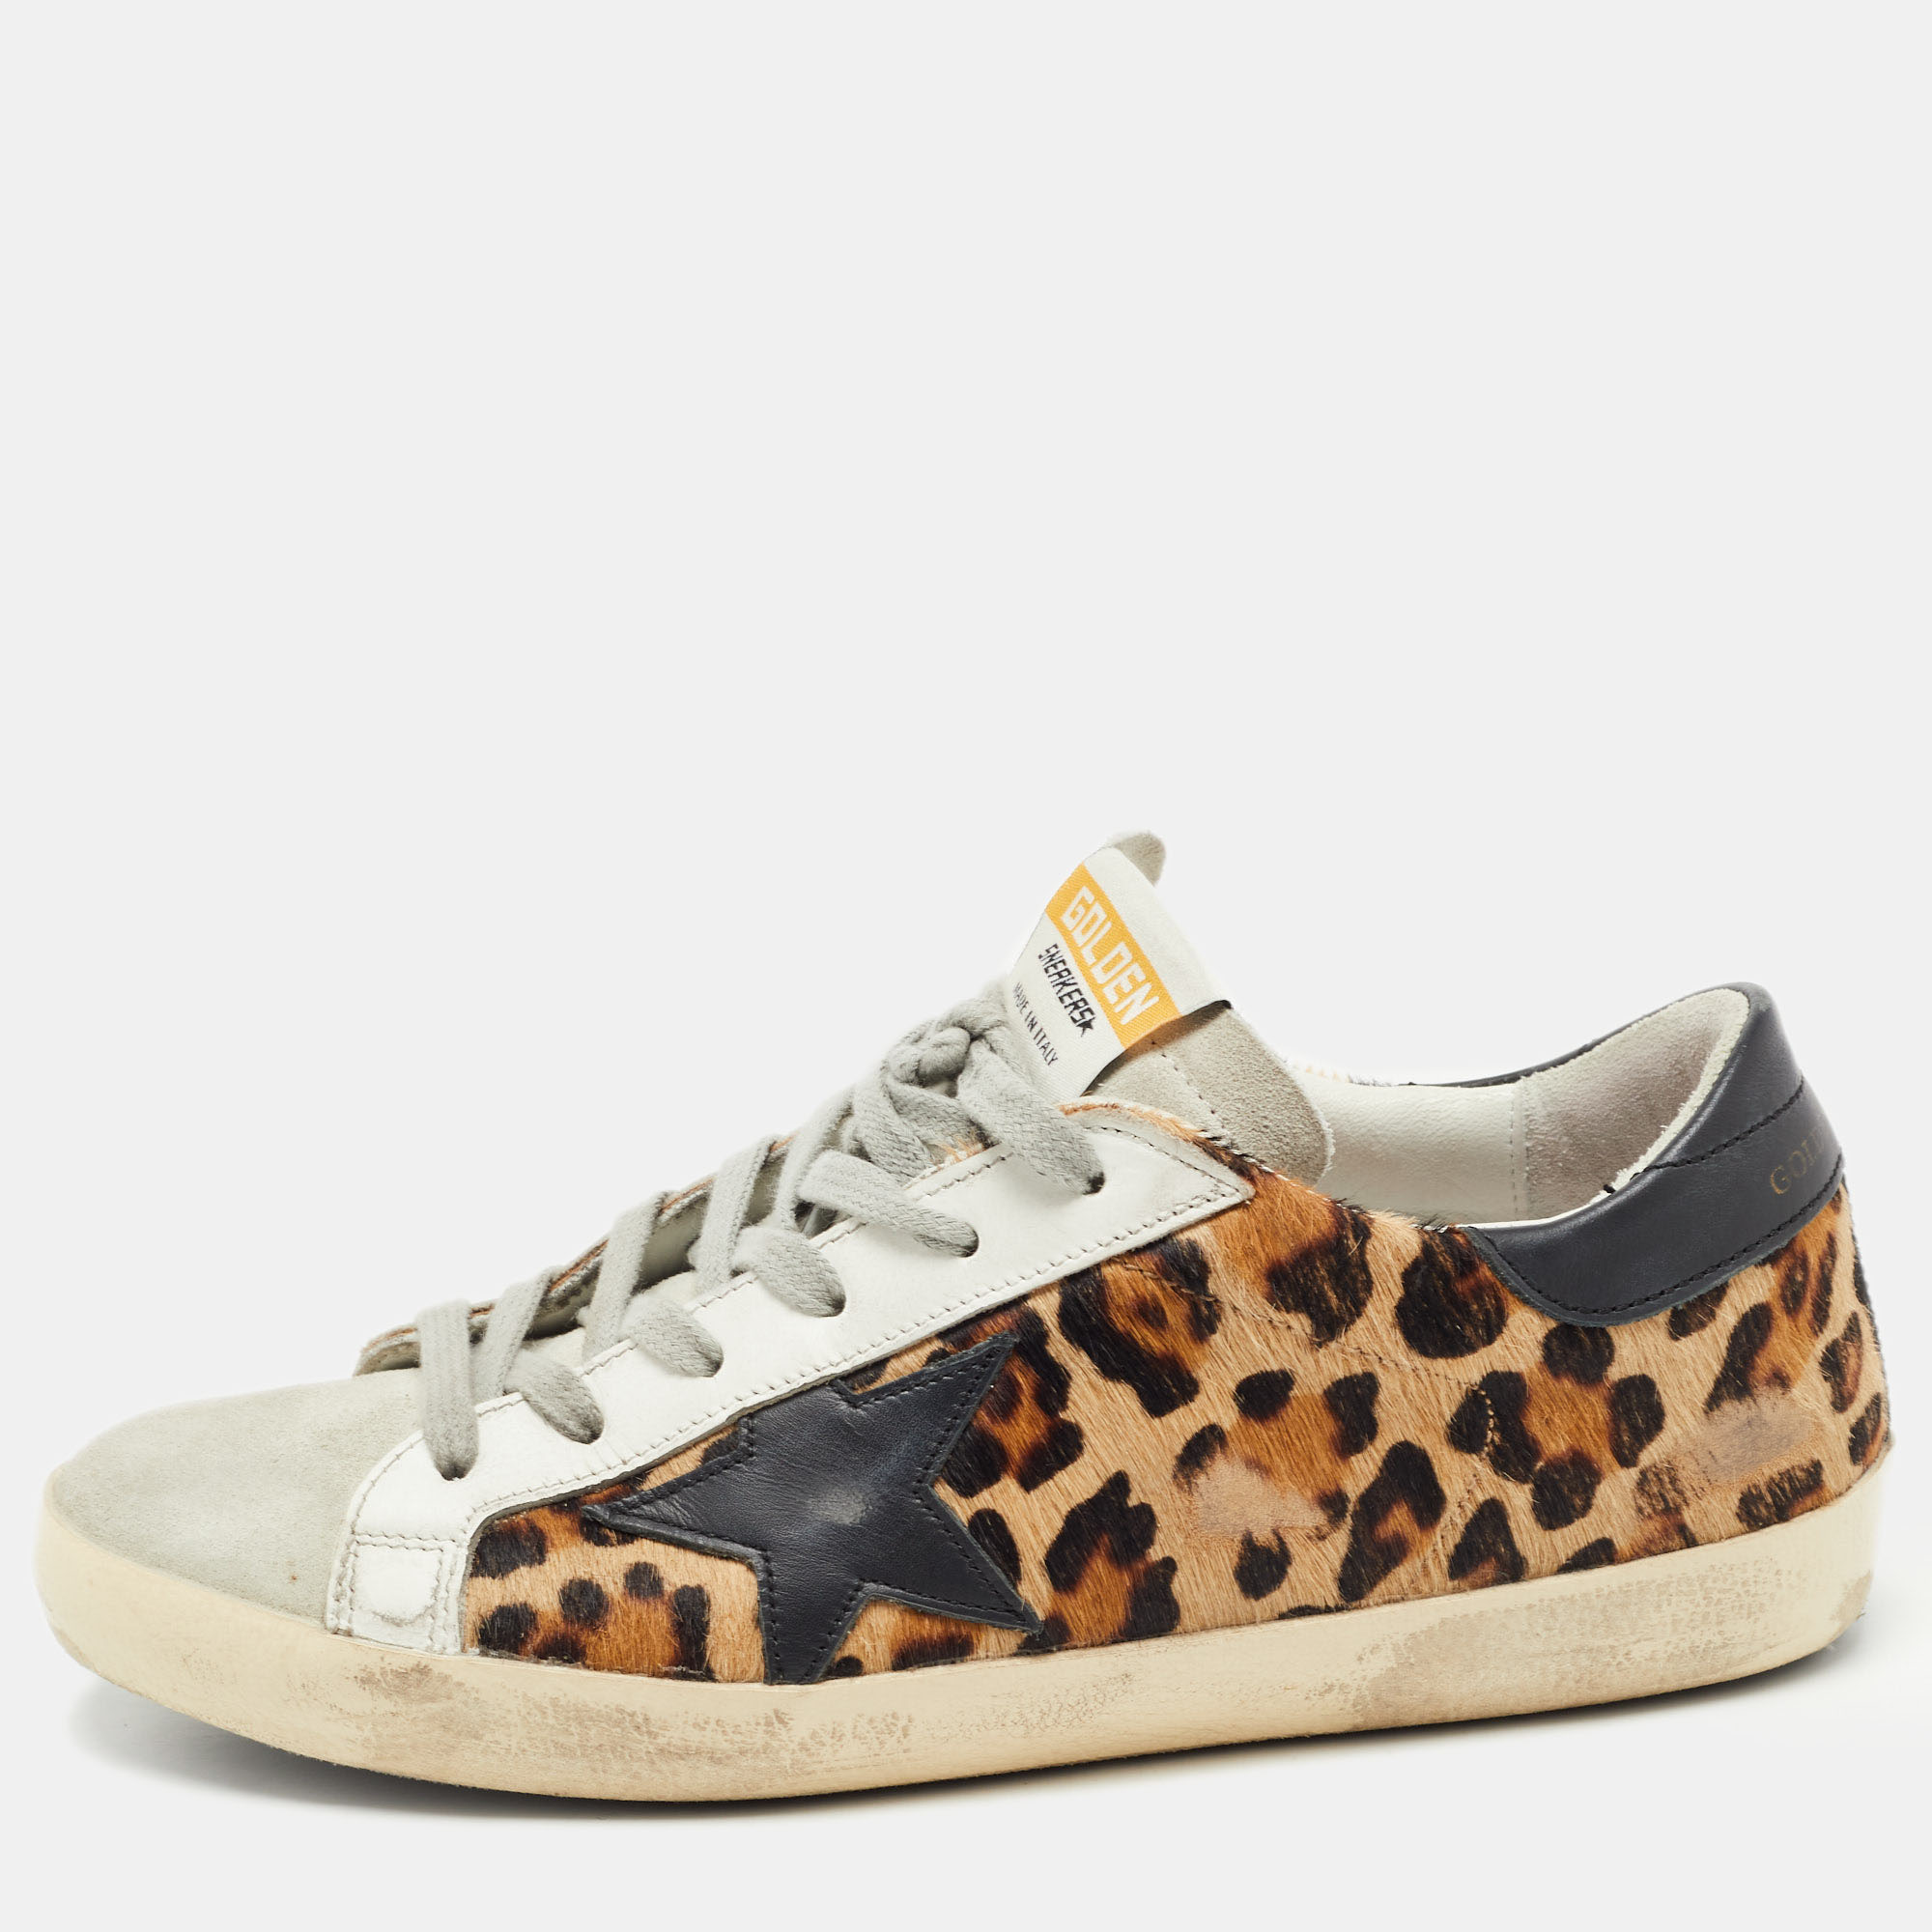 Golden Goose Tricolor Leopard Print Calf Hair and Leather Superstar Sneakers Size 38